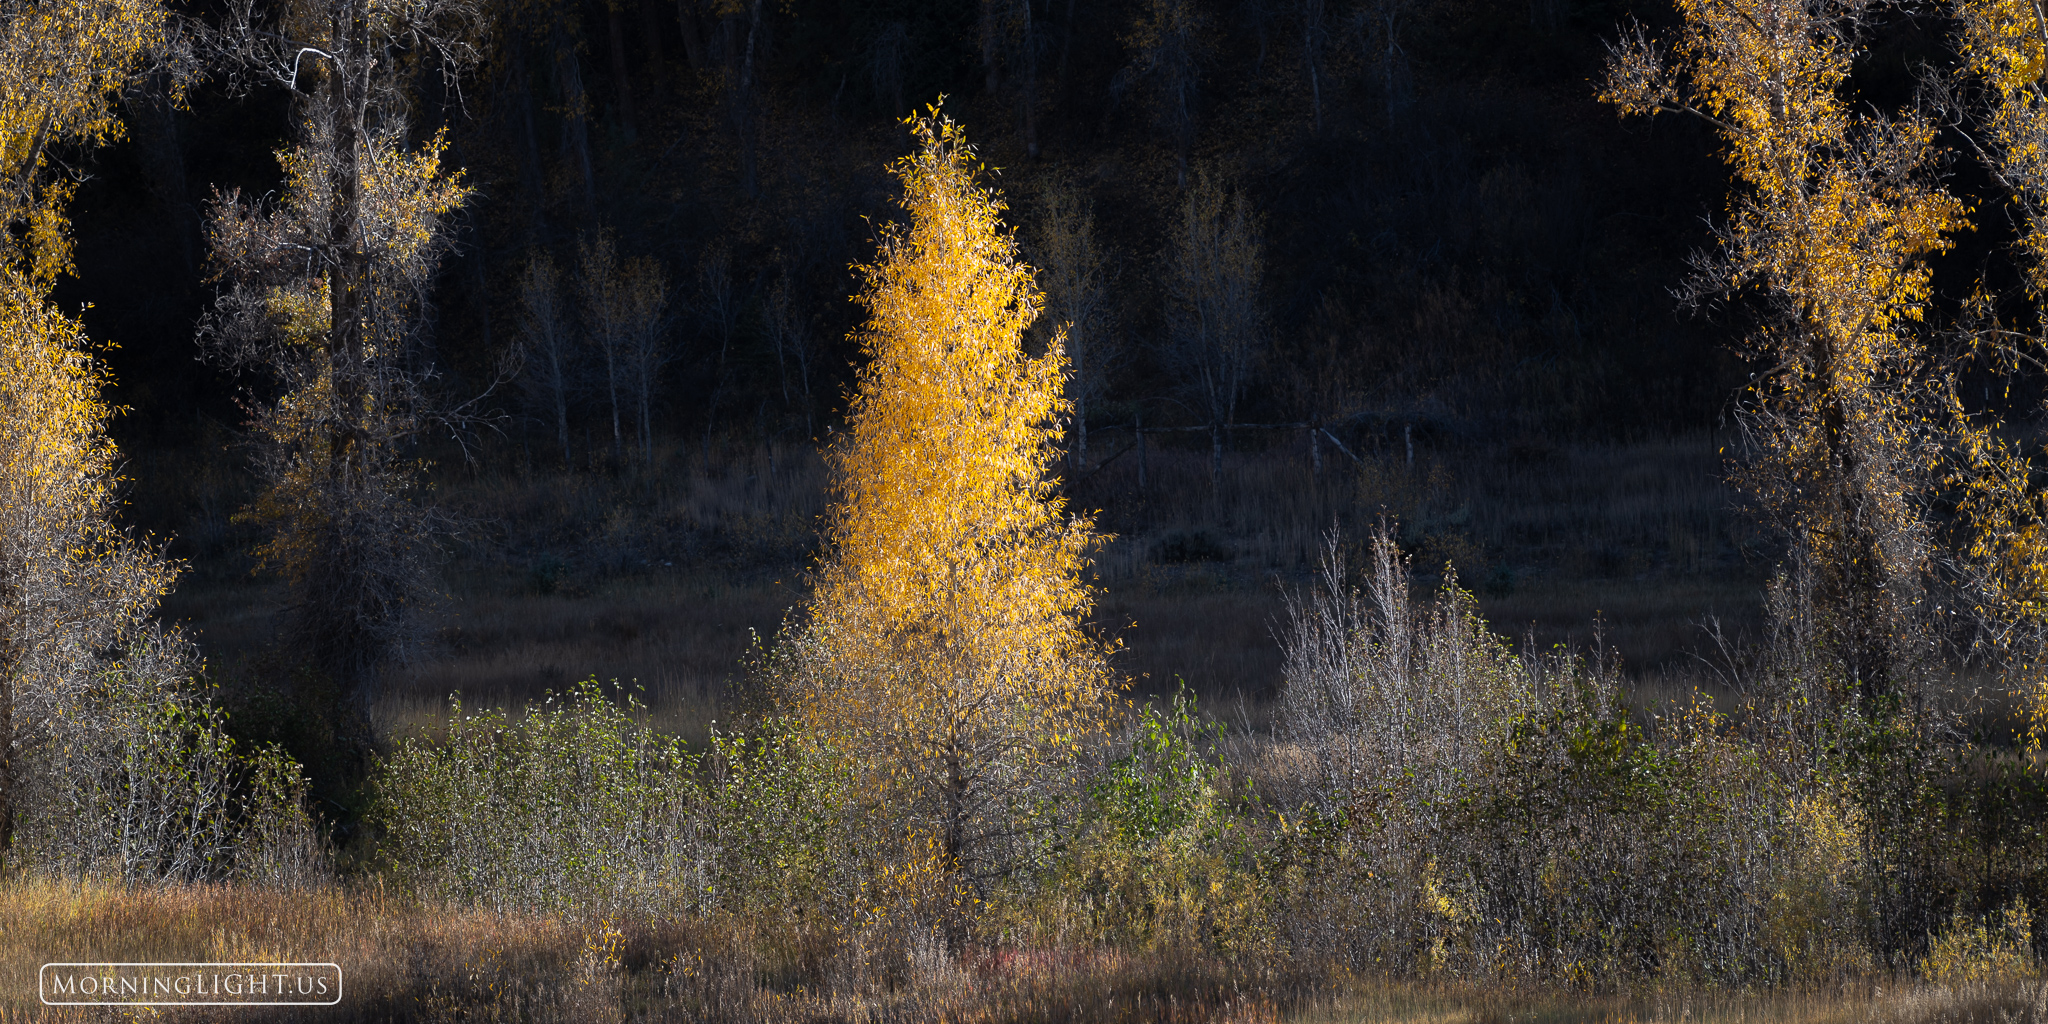 While driving through western Colorado in late September I came across this delightful scene on a ranch. This small tree was...